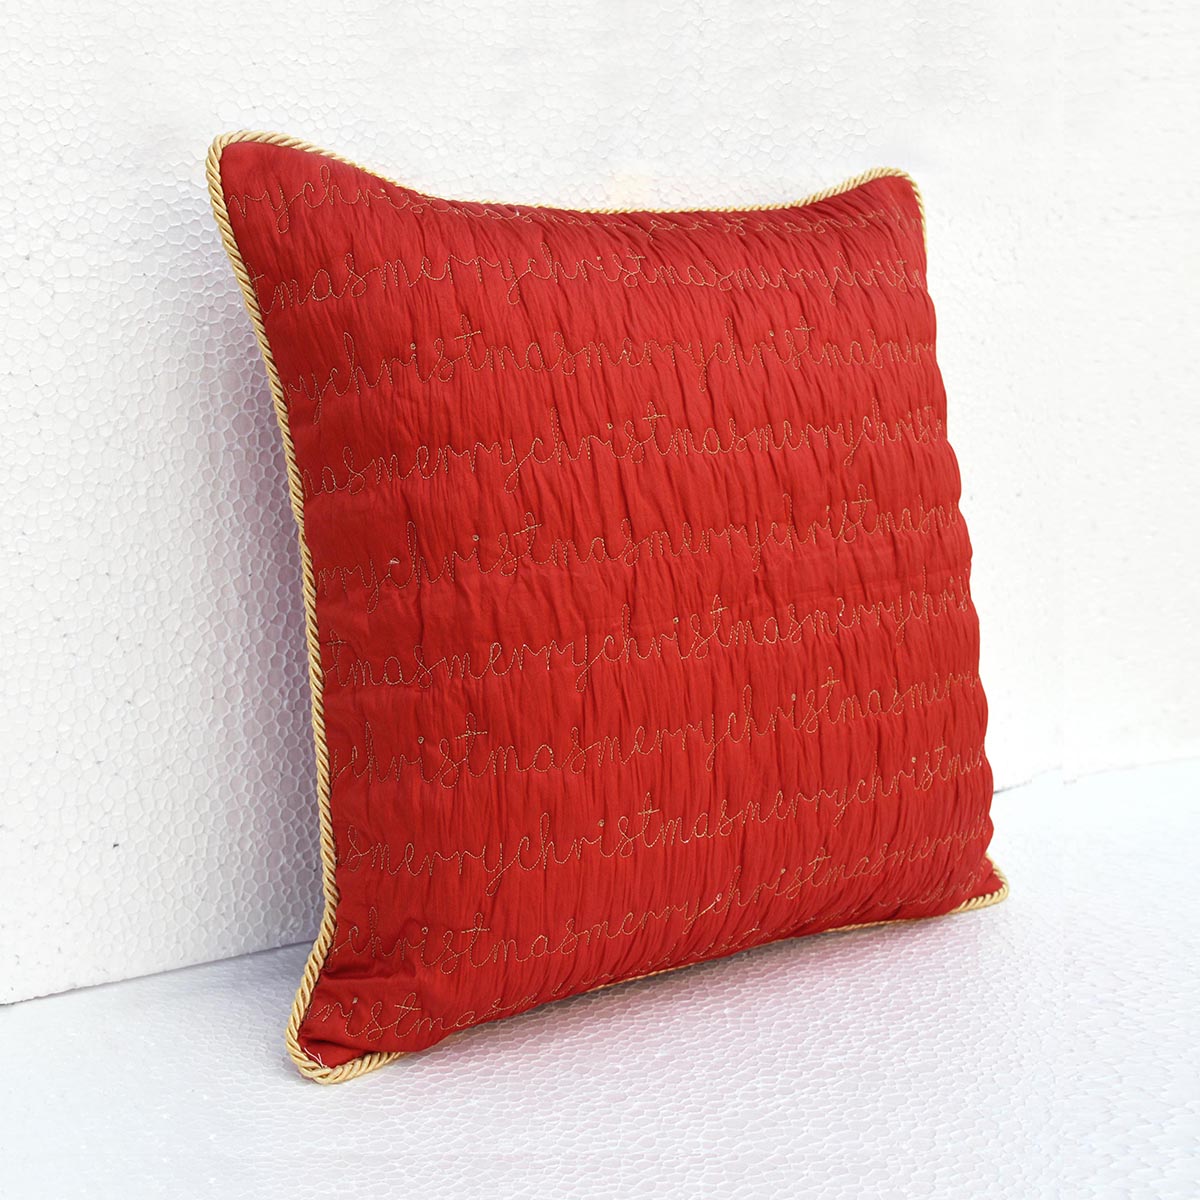 Christmas pillow cover, red and gold, script, merry Christmas, quilted, embroidered cushion cover